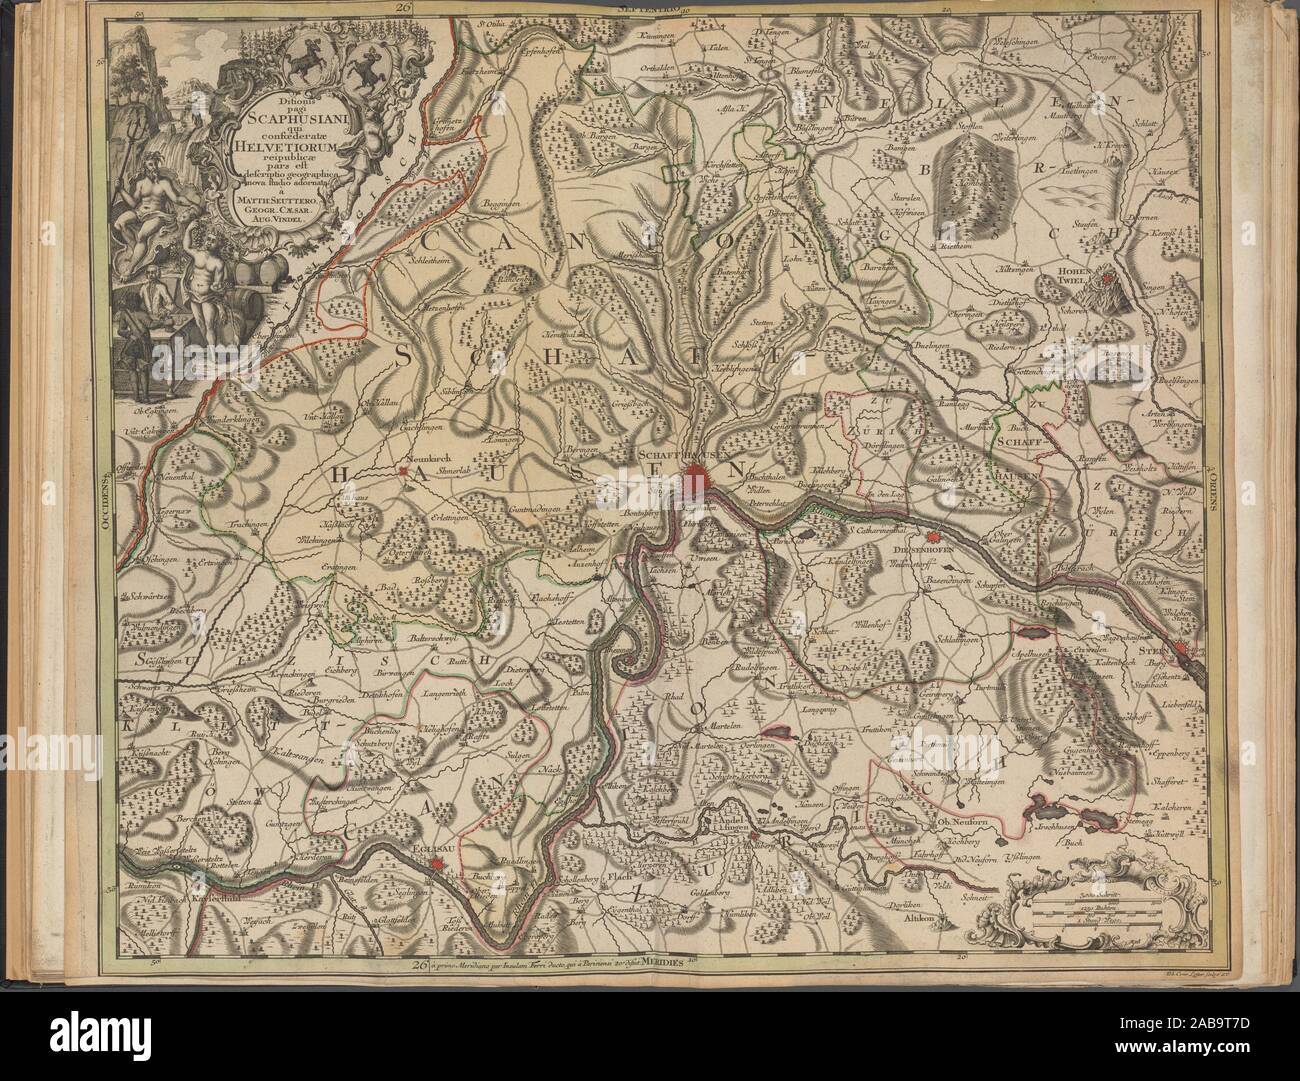 Ditionis pagi Scaphusiani,. Homann, Johann Baptist, 1663-1724 (Cartographer). Atlases, gazetteers, guidebooks and other books Maps of Switzerland and Stock Photo